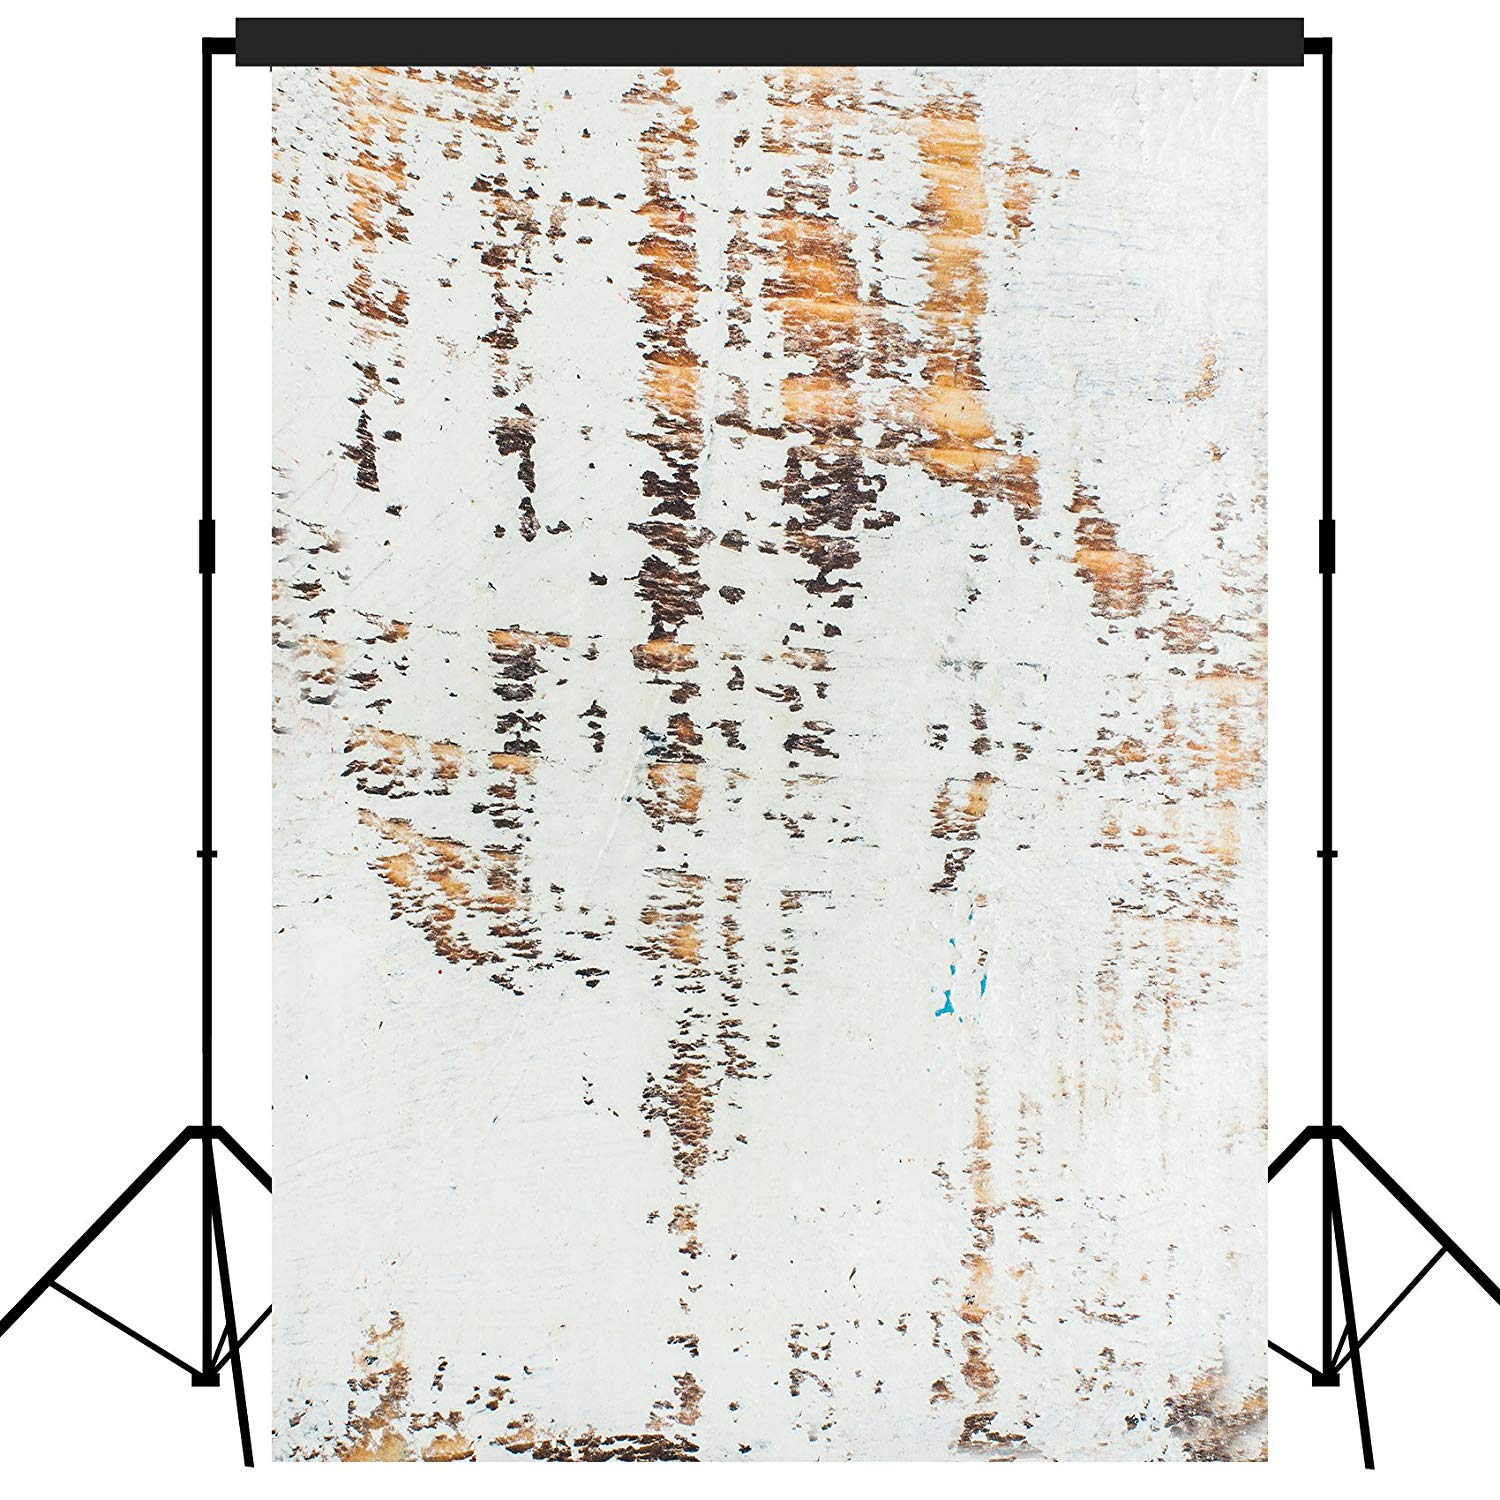 Rustic Distressed Backdrop Photography Background Party 7x5feet #1802